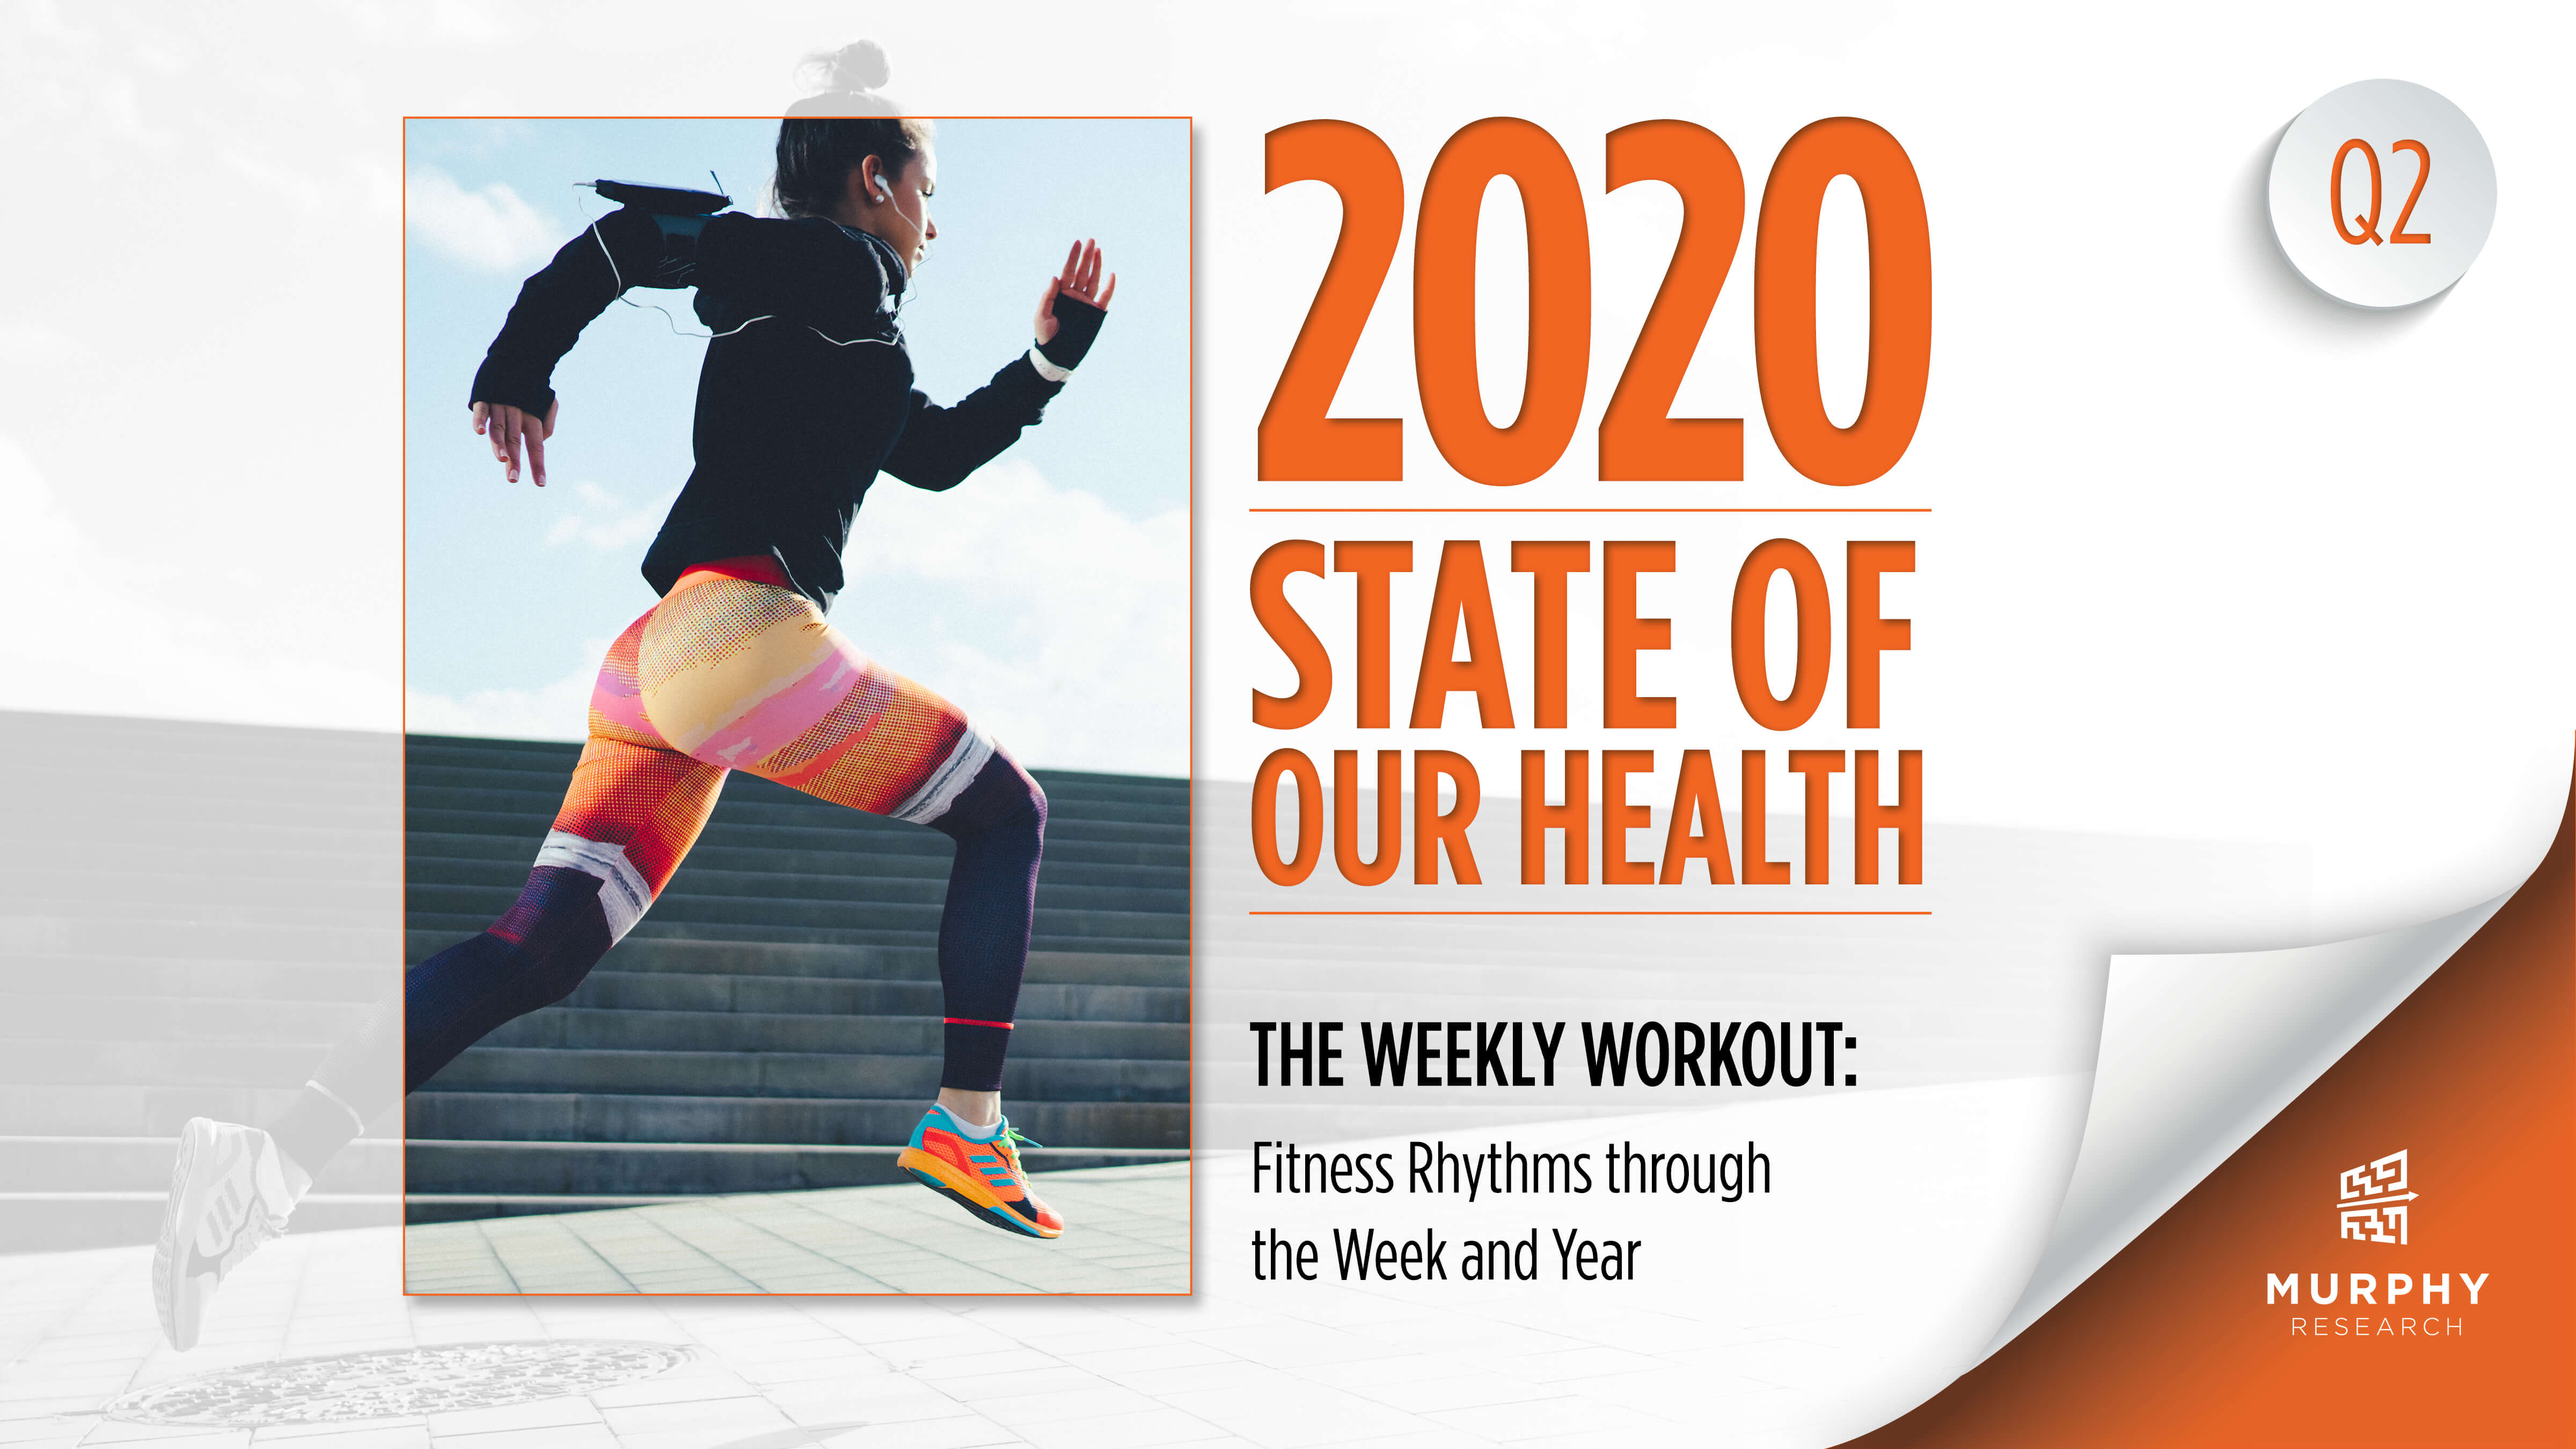 It's Now Available! The Weekly Workout: Fitness Rhythms through the Week and Year